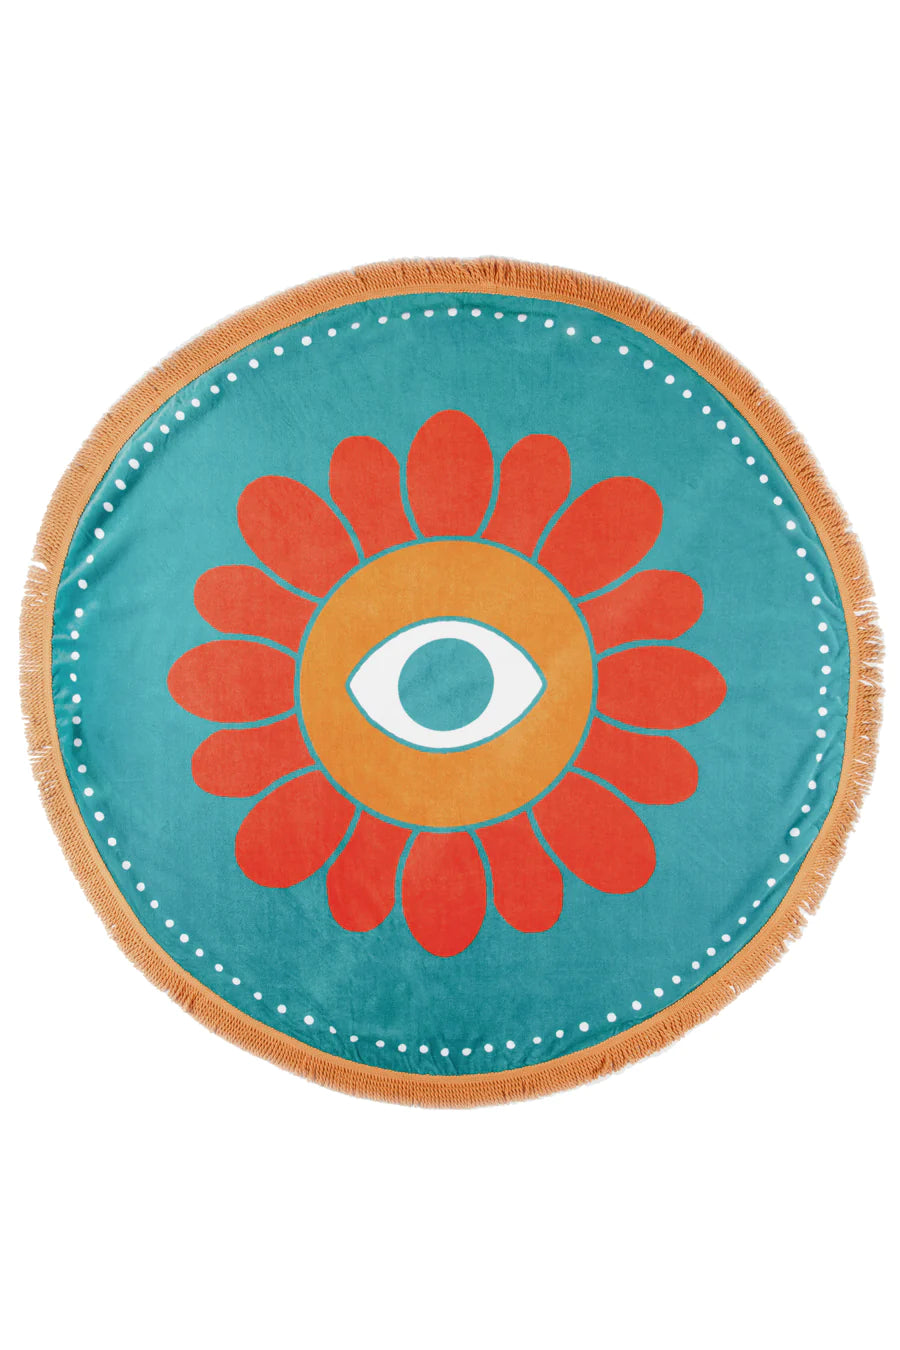 Tofino Towel Co. The Flower Power Round Towel